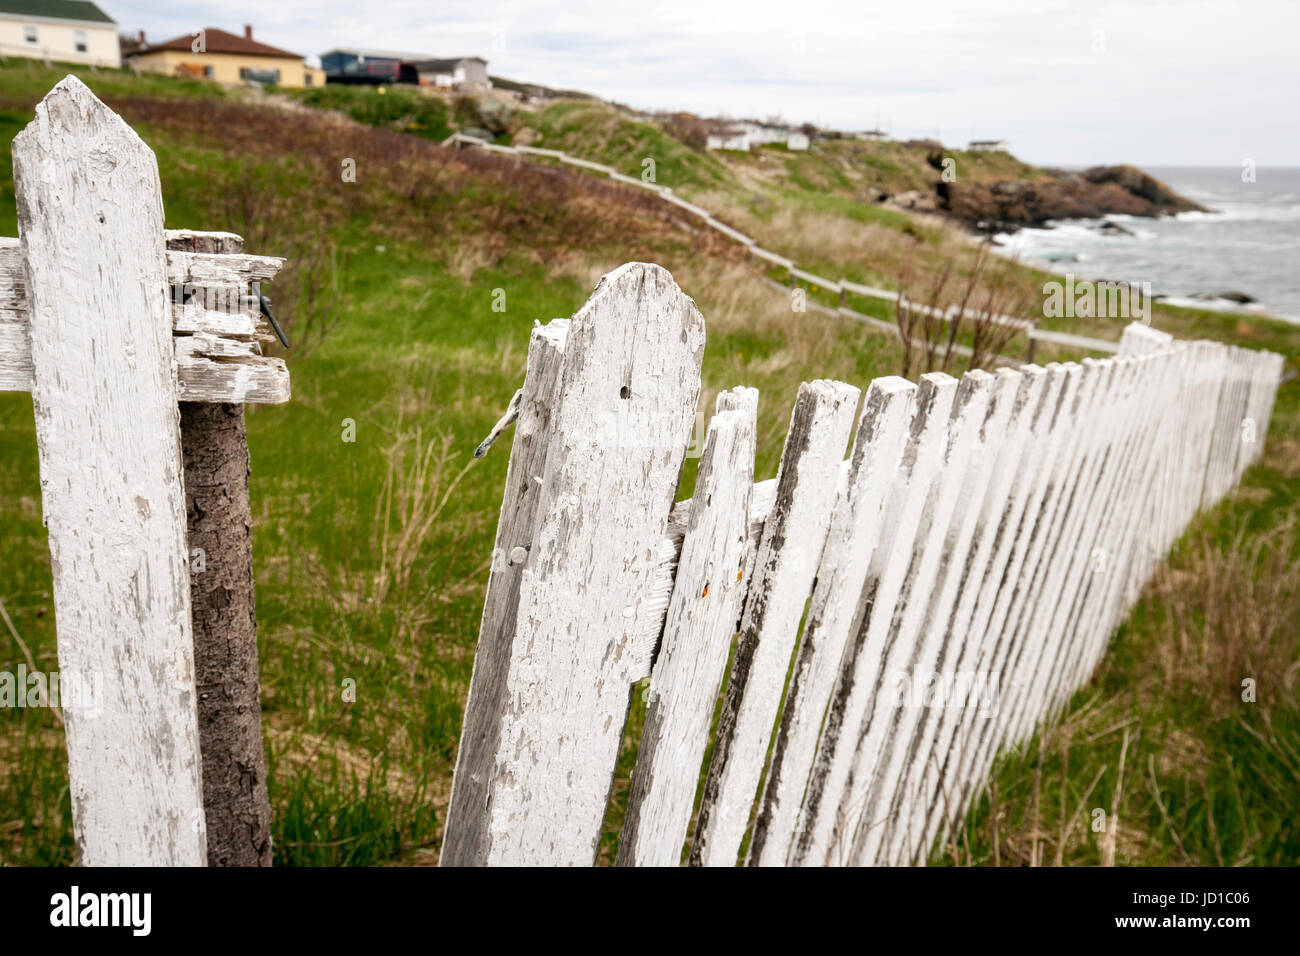 Weathered Fence in Pouch Cove, Avalon Peninsula, Newfoundland, Canada Stock Photo